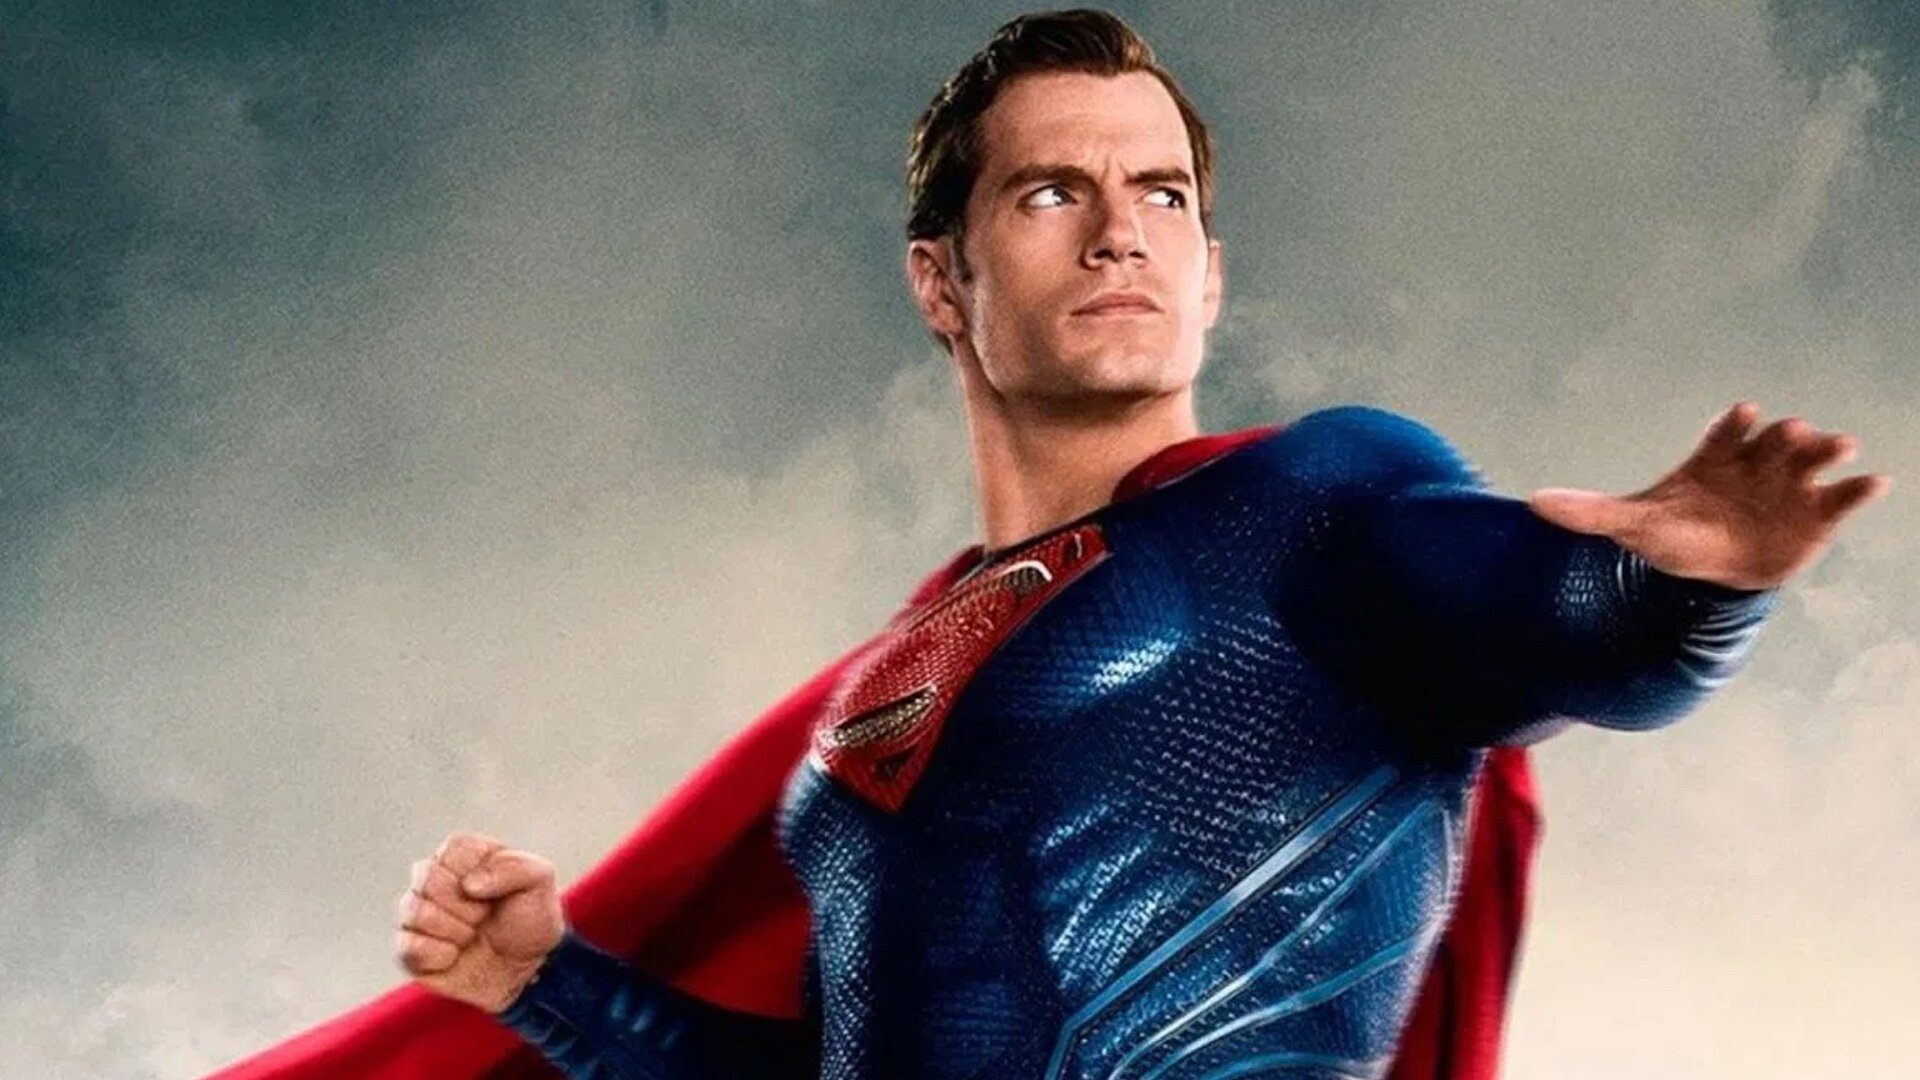 Henry Cavill on Keeping His Superman Hopes Alive Over the Years